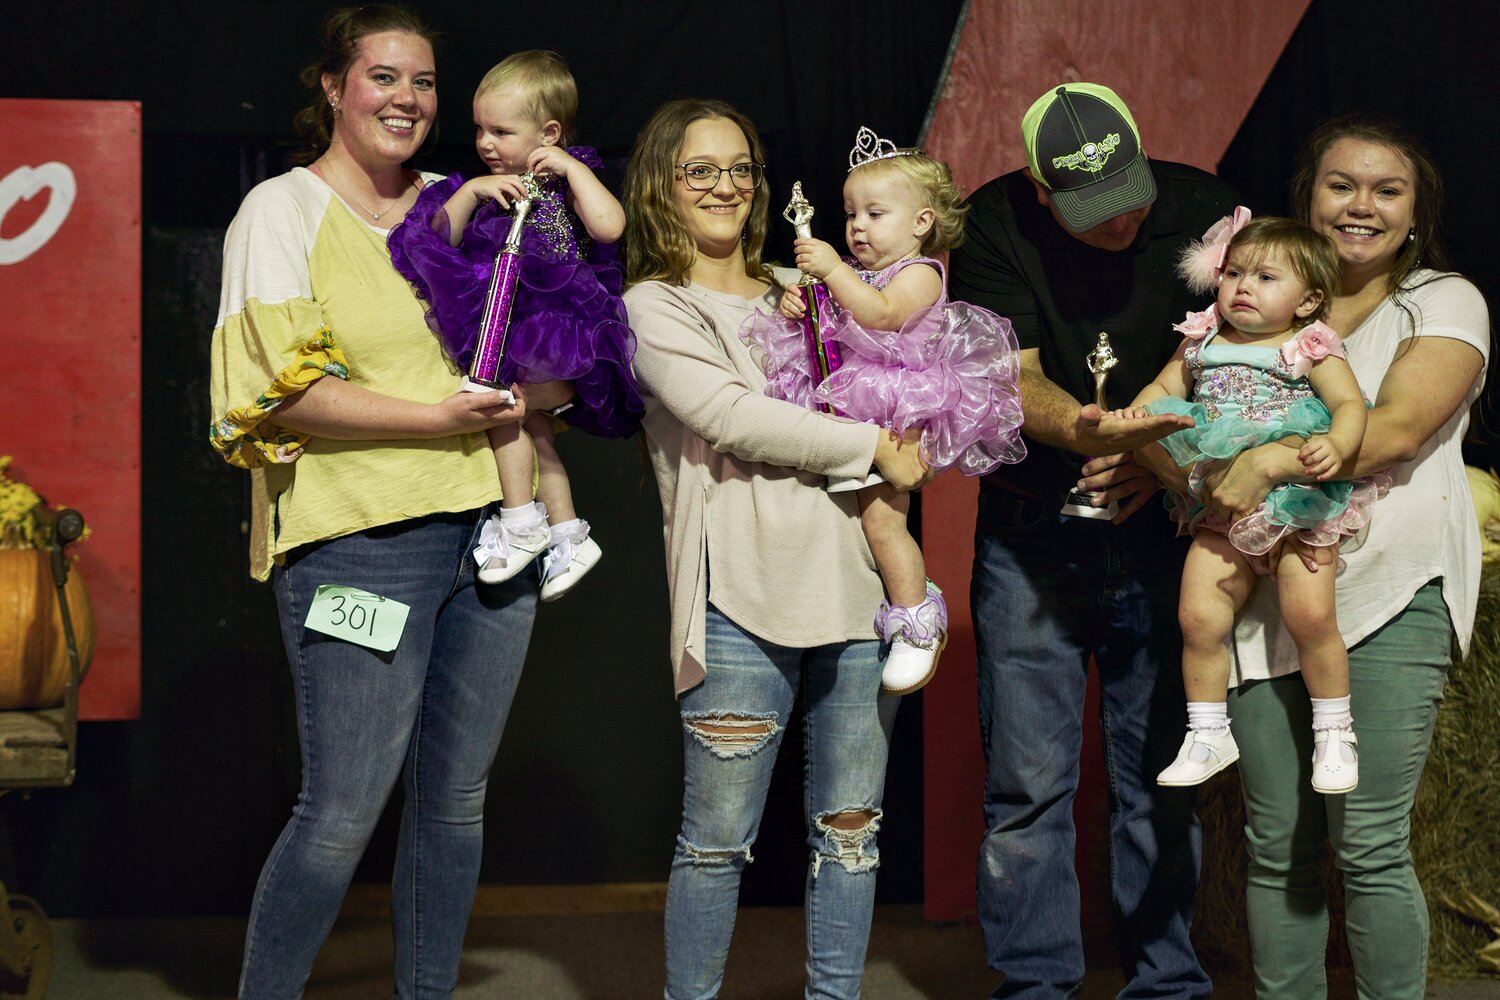 13-18 Month Old Girls – 1st Alternate, Caroline Whitfield, daughter of Austin and Allie Whitfield of Iuka; Winner, Everleigh Dawn Newcomb, daughter of Shelby-Lynn Newcomb and Joshua Caleb Newcomb of Iuka; and 2nd Alternate, Andee Rose Tapp, daughter of Nick Tapp and Tamara Toth of Iuka.